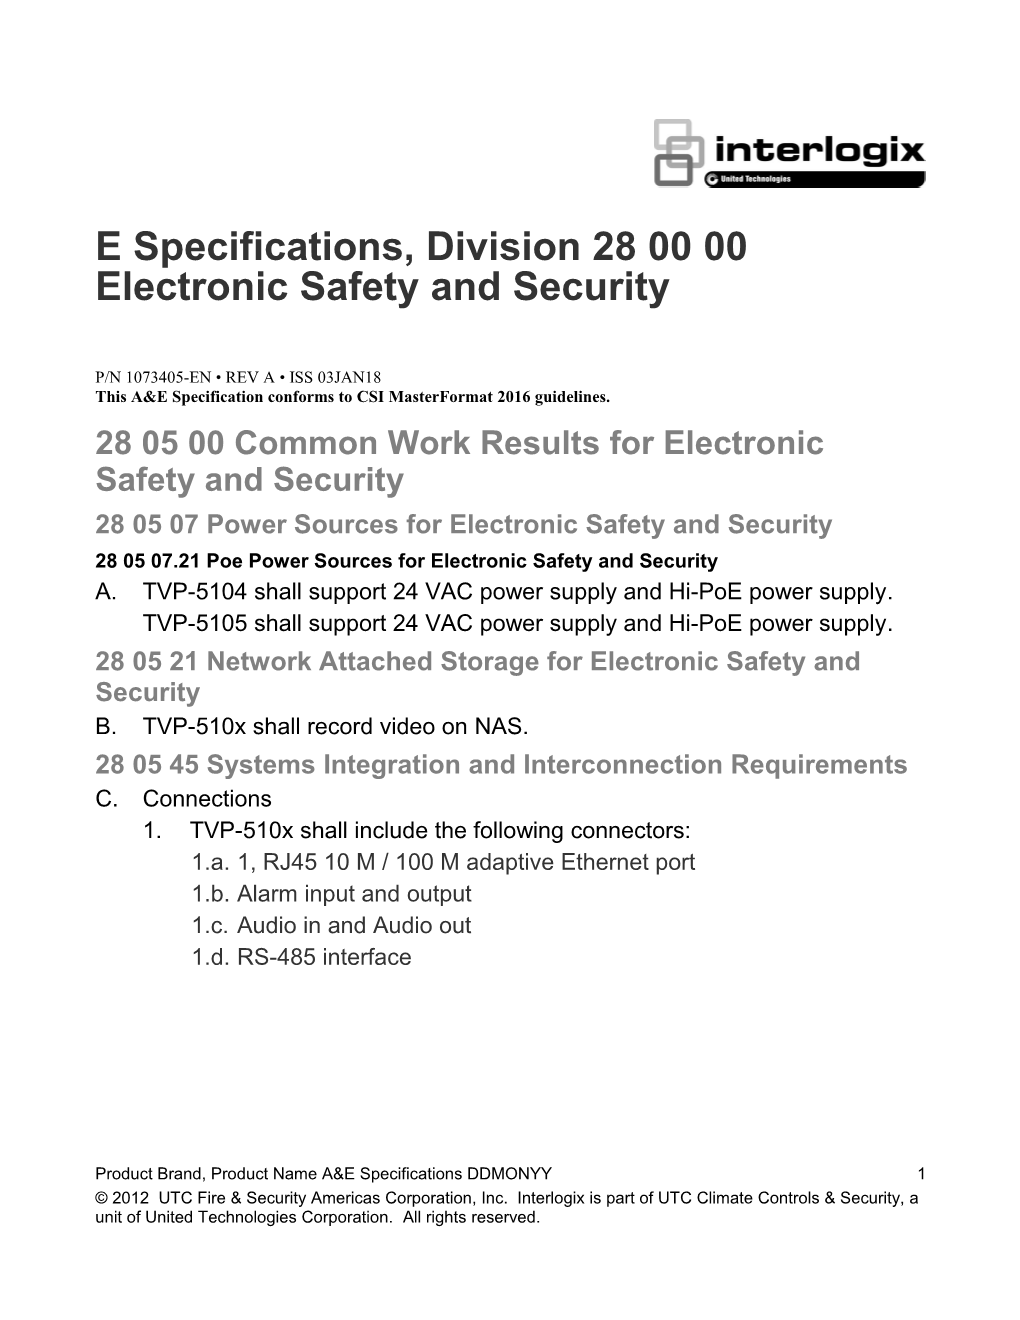 TVP-510X IP PTZ Camera A&E Specifications, Division 28 00 00 Electronic Safety and Security